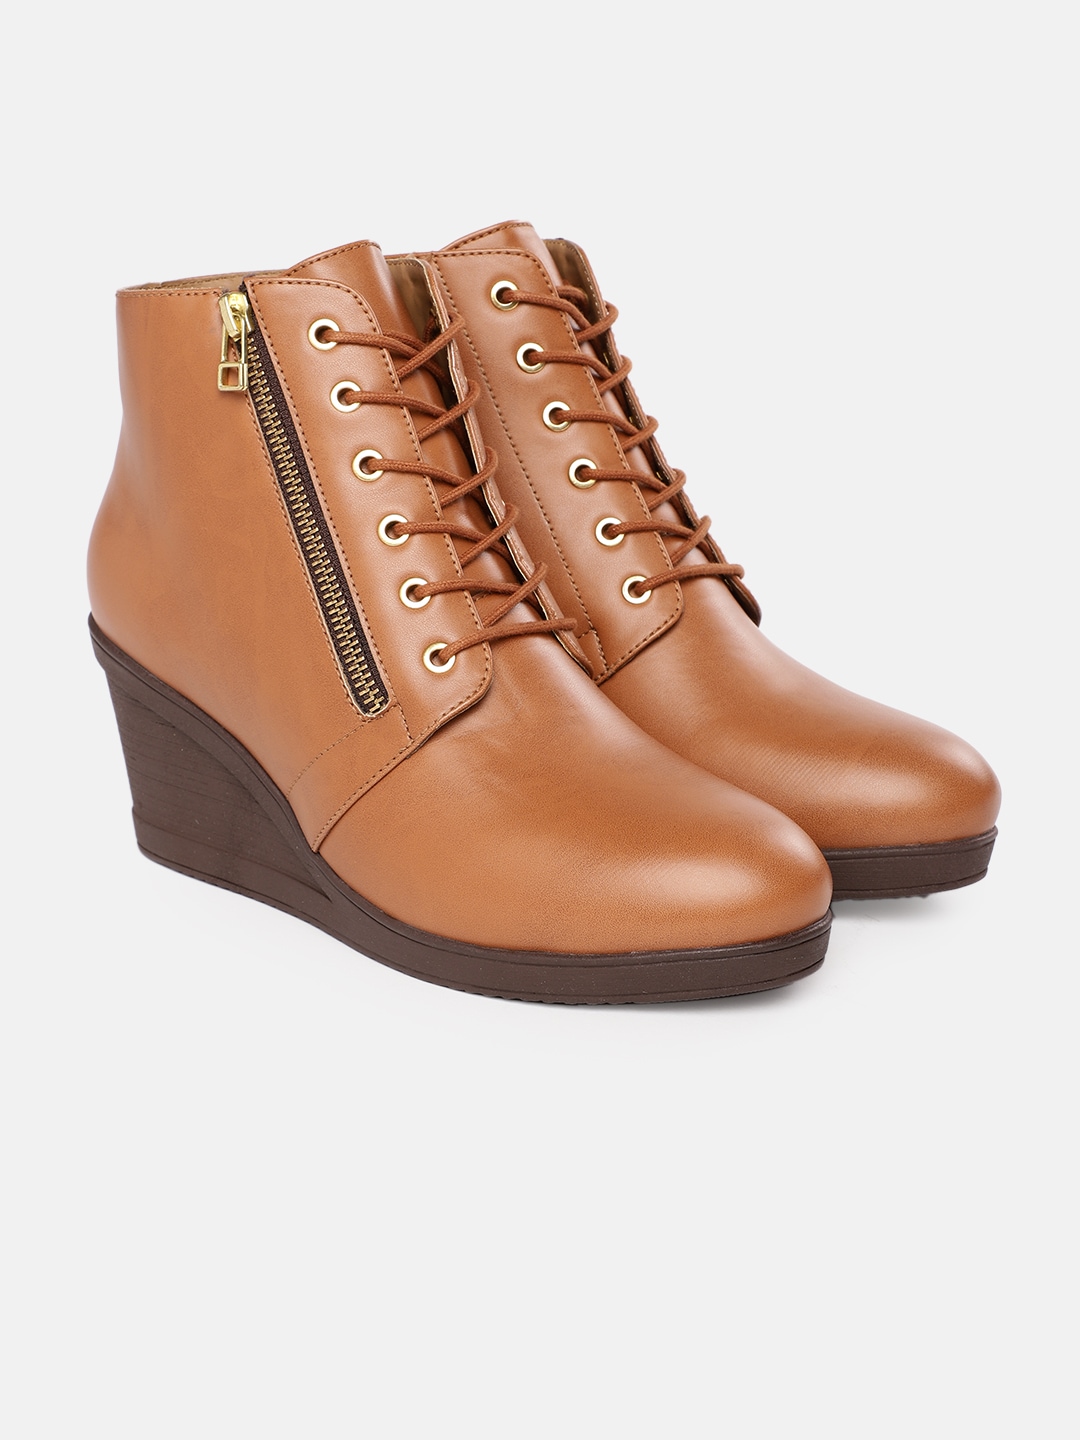 Roadster Women Tan Brown Solid Mid-Top Wedge Heeled Boots Price in India